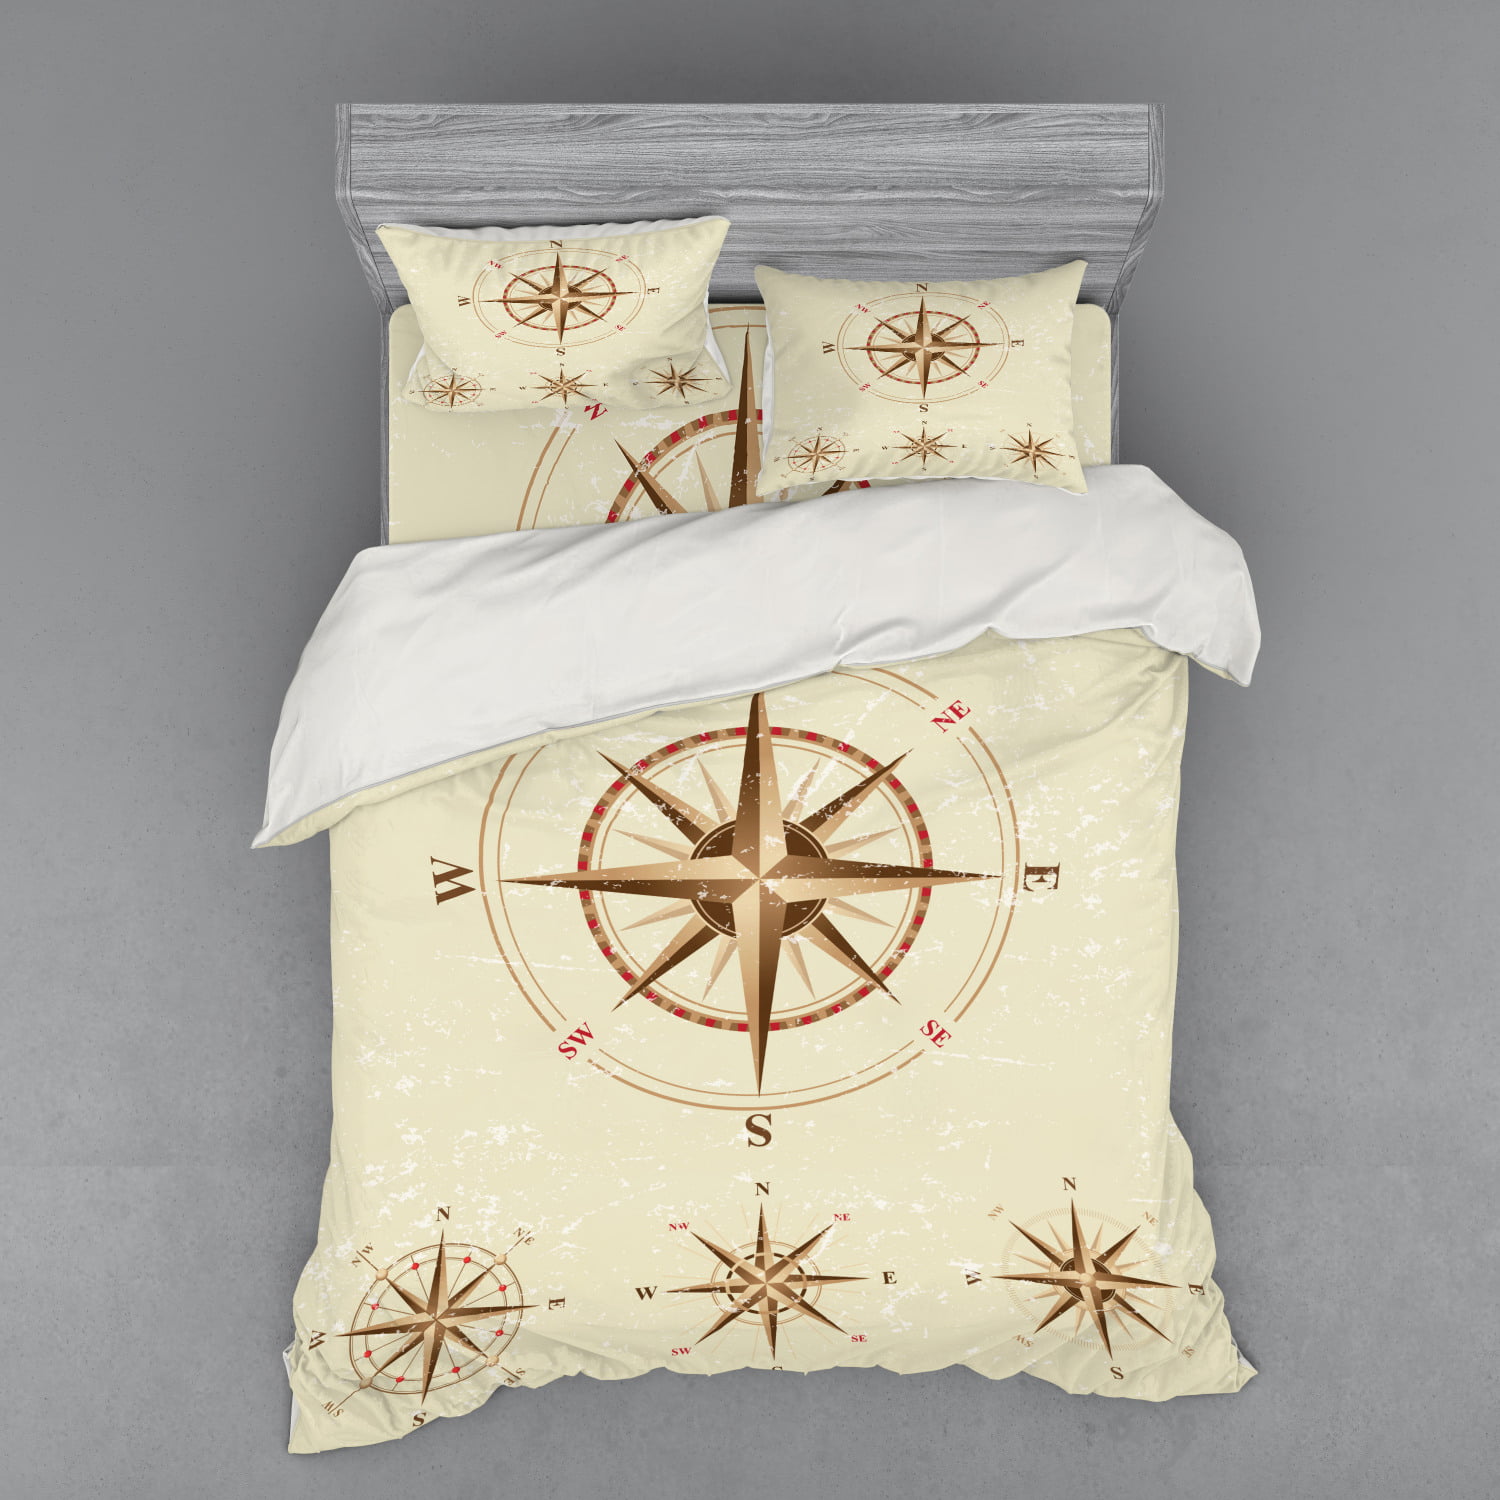 LEO BON Compass Duvet Cover Set Full Size Four Different Compasses in Retro Colors Discovery Equipment Where Nautical Marine Floral Duvet Cover and Pillow Shams Bed Set Beige Tan